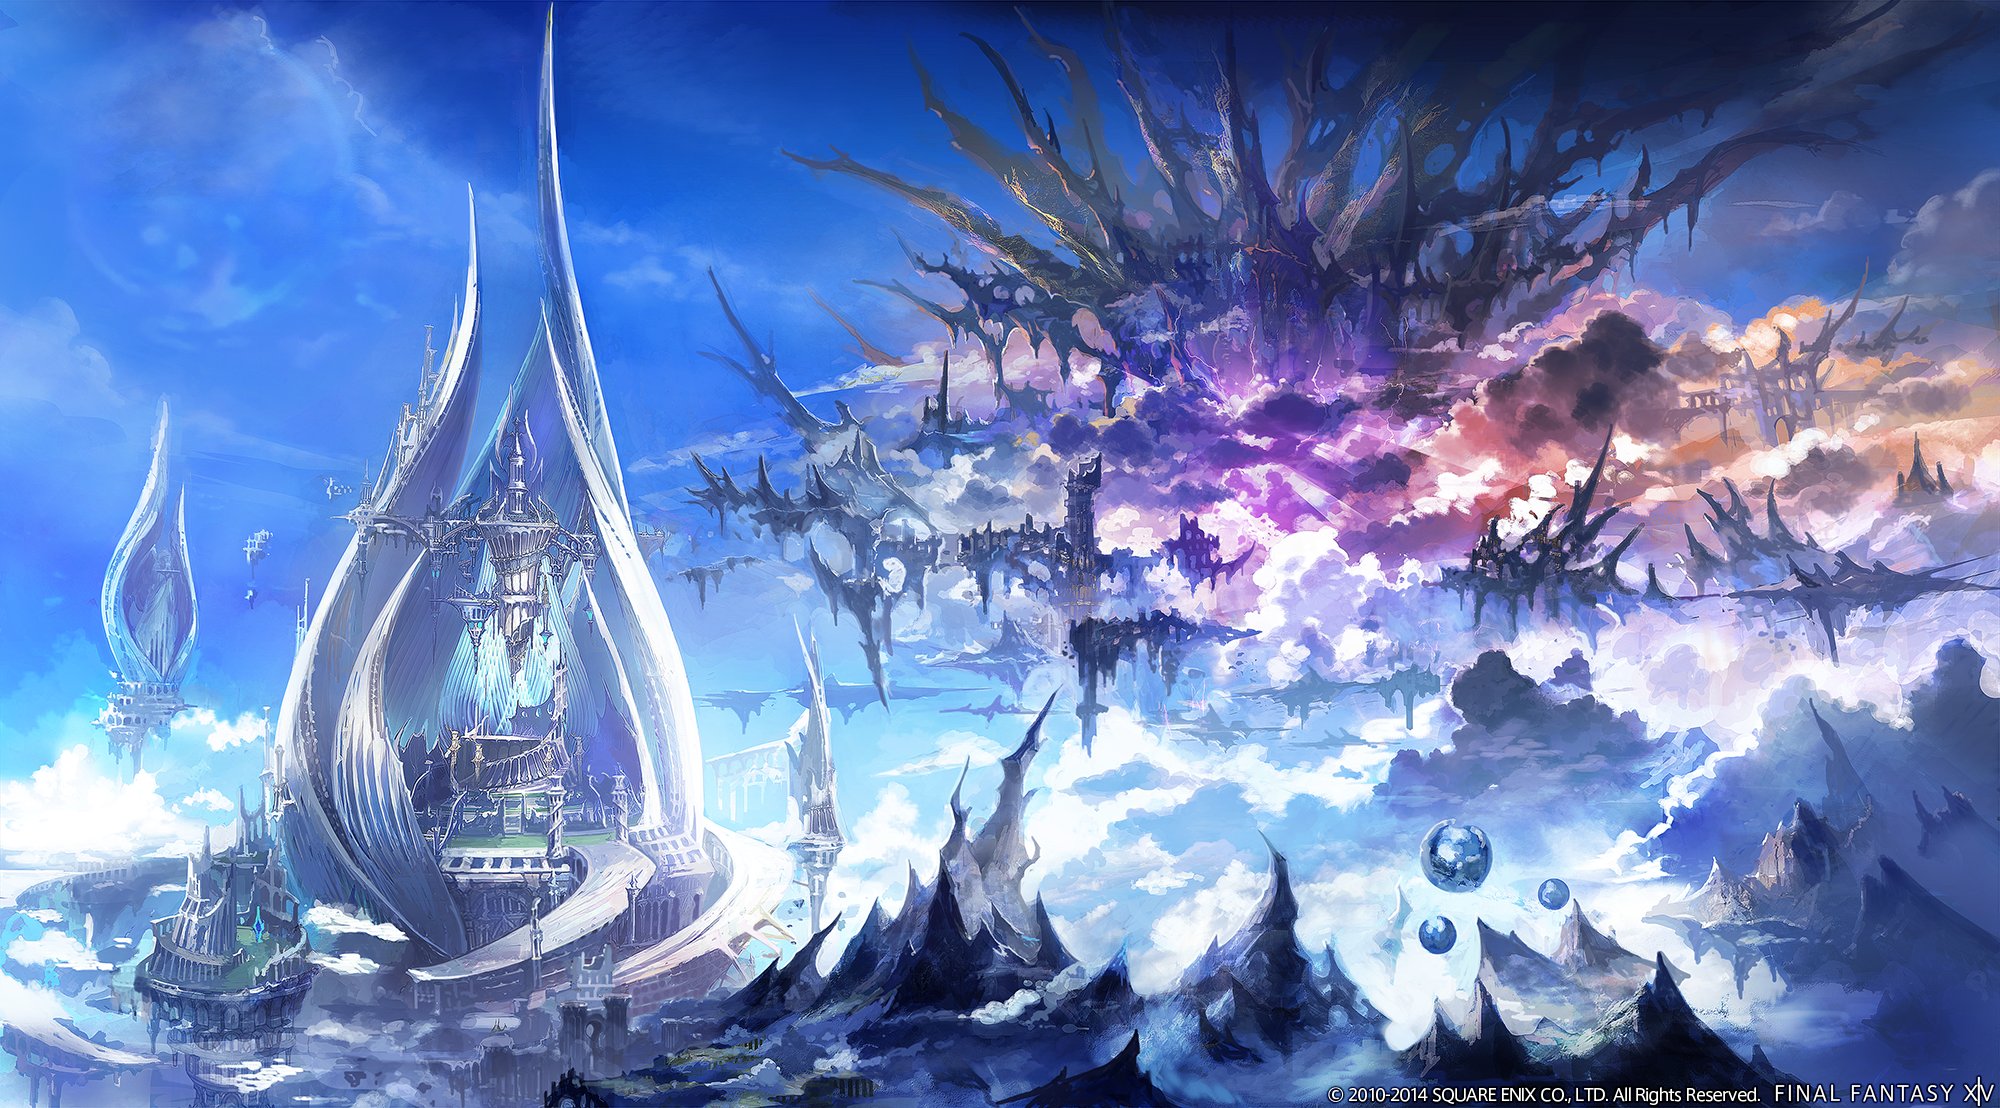 Enix Announced More Details For The Uping Expansion Heavensward